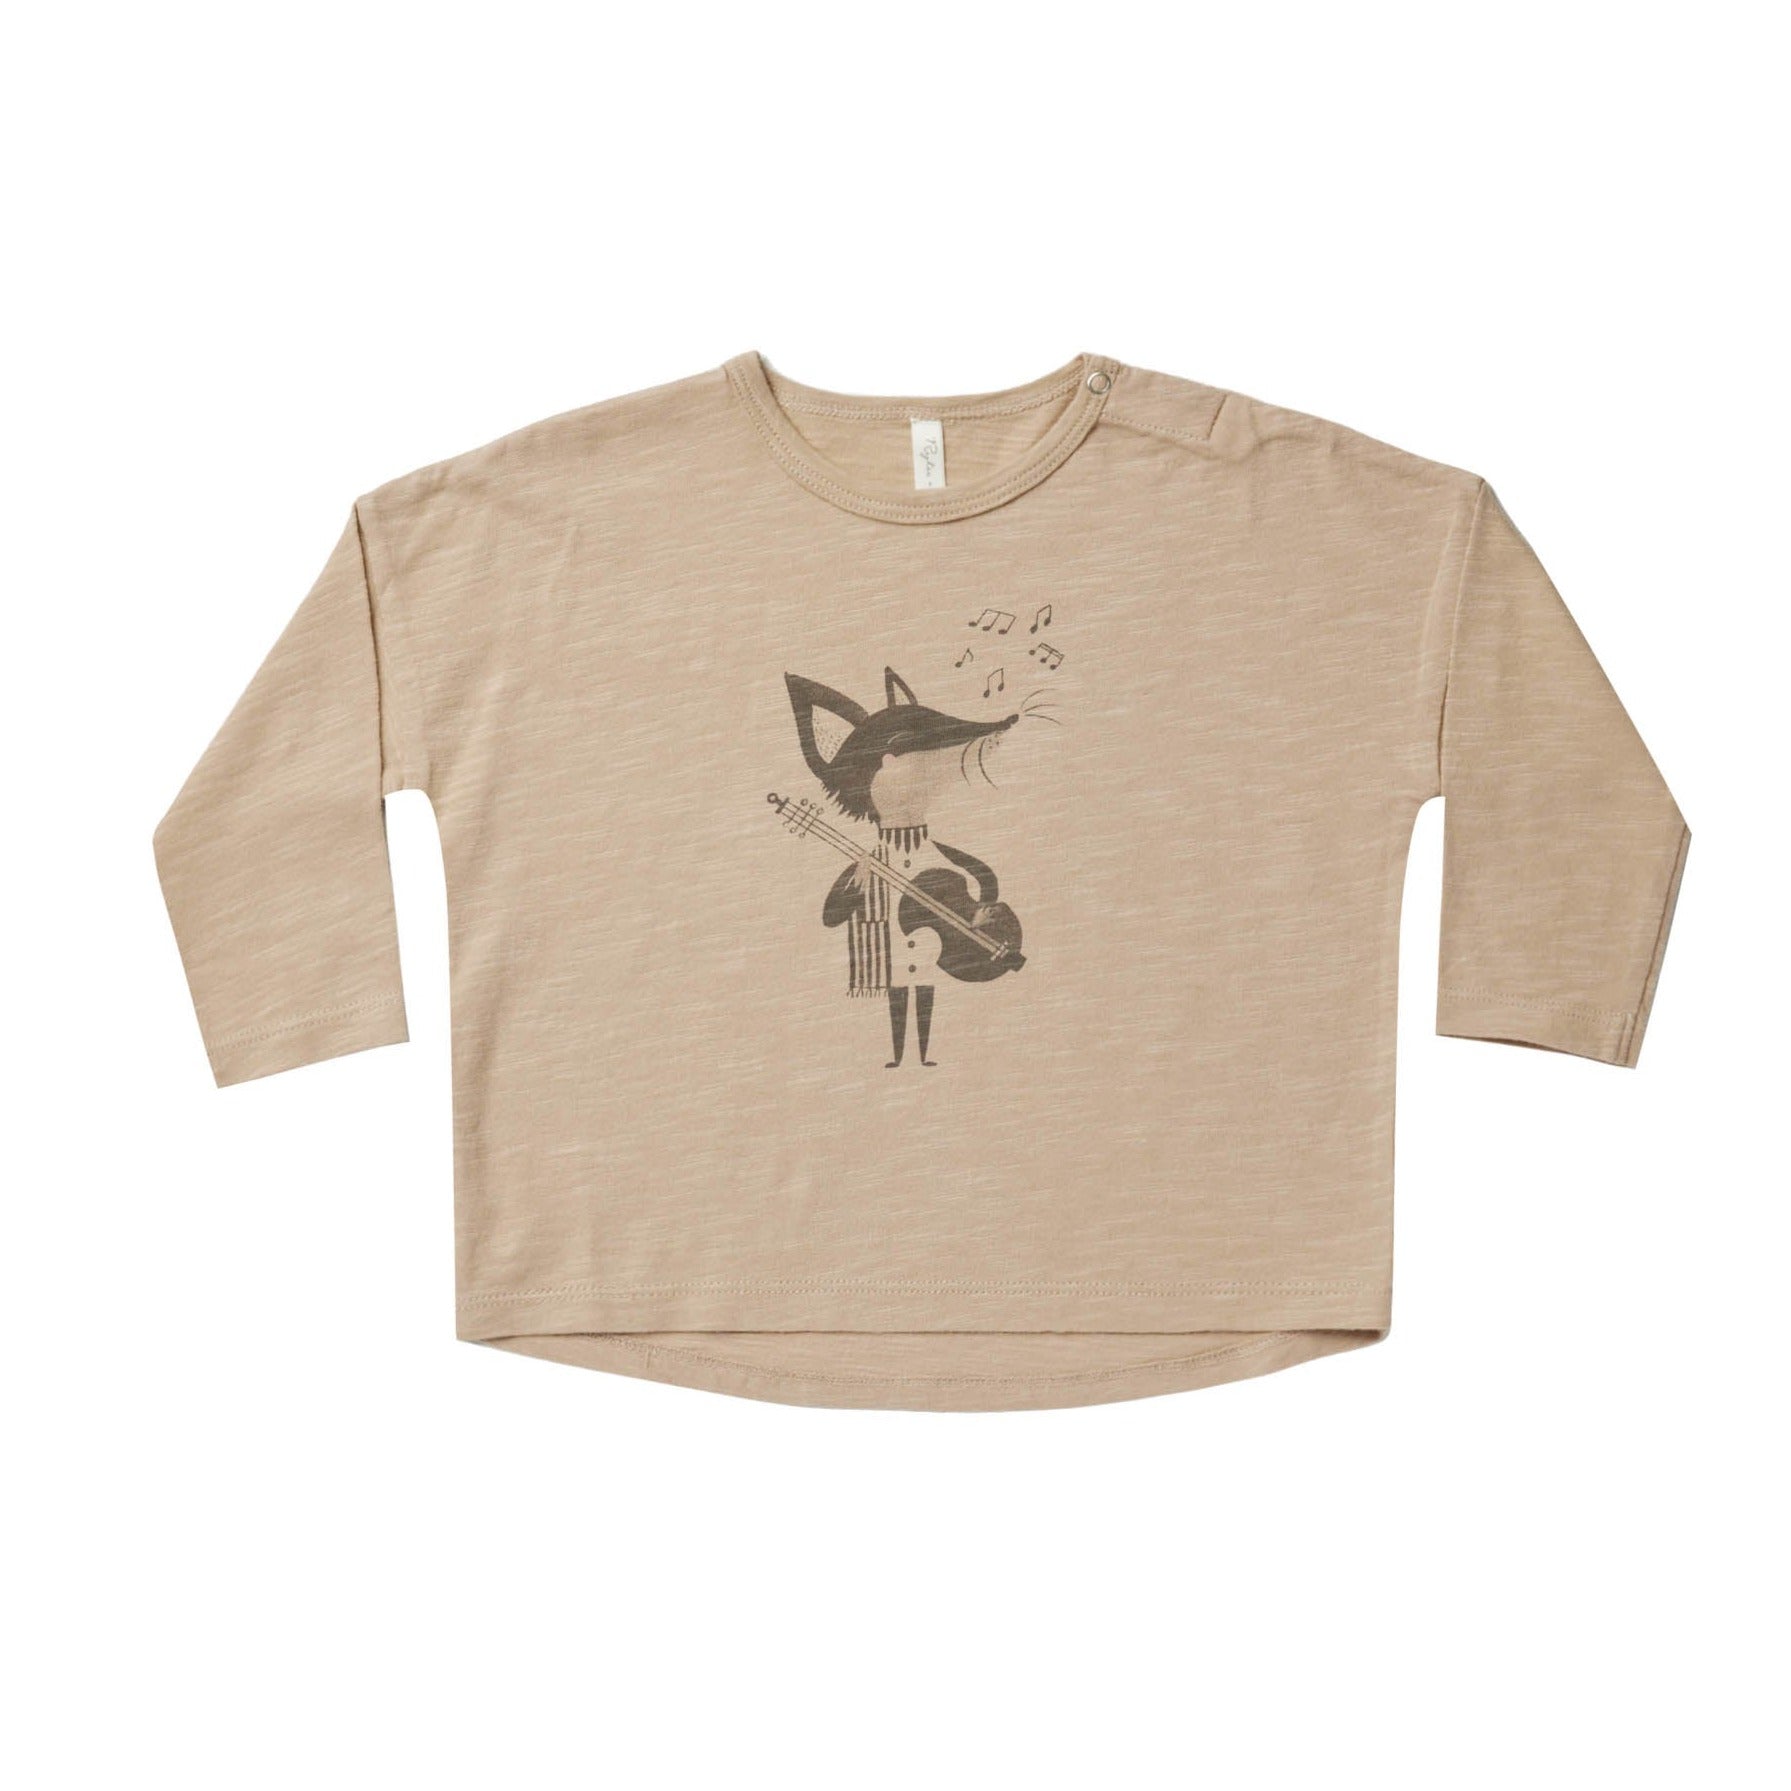 Rylee and Cru baby tee in long sleeves with design of a fox playing guitar at Bonjour Baby Baskets